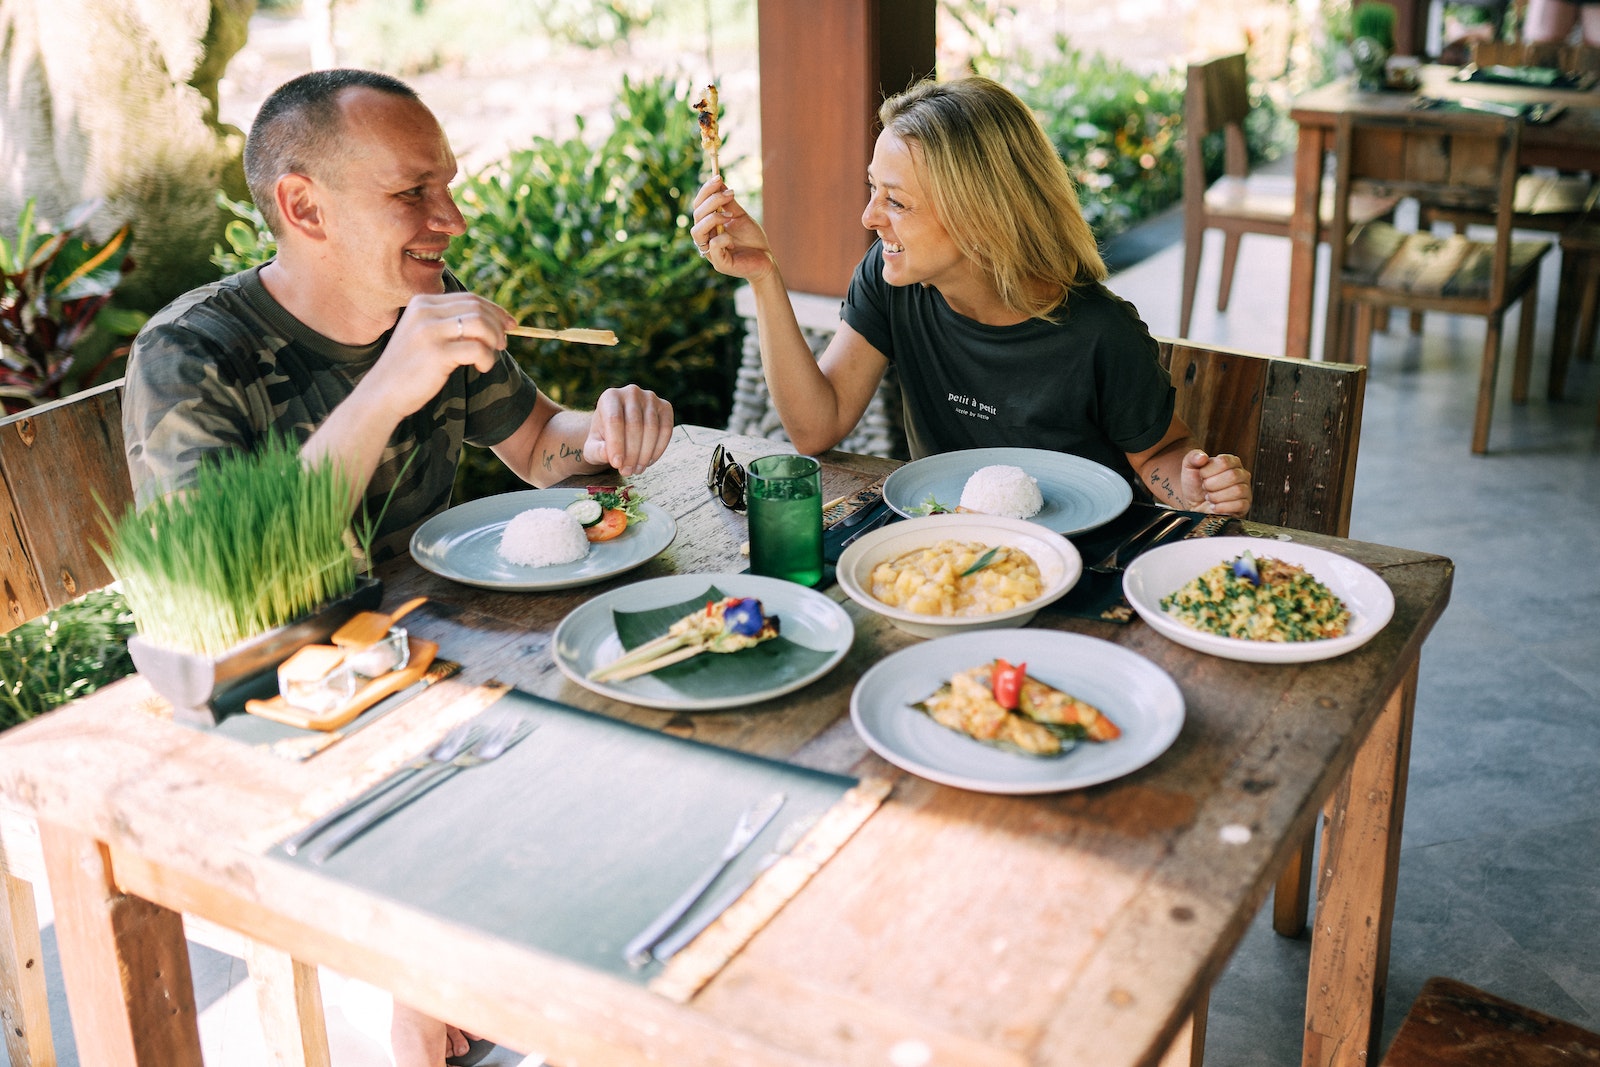 How to balance healthy eating and social life eating in restaurant